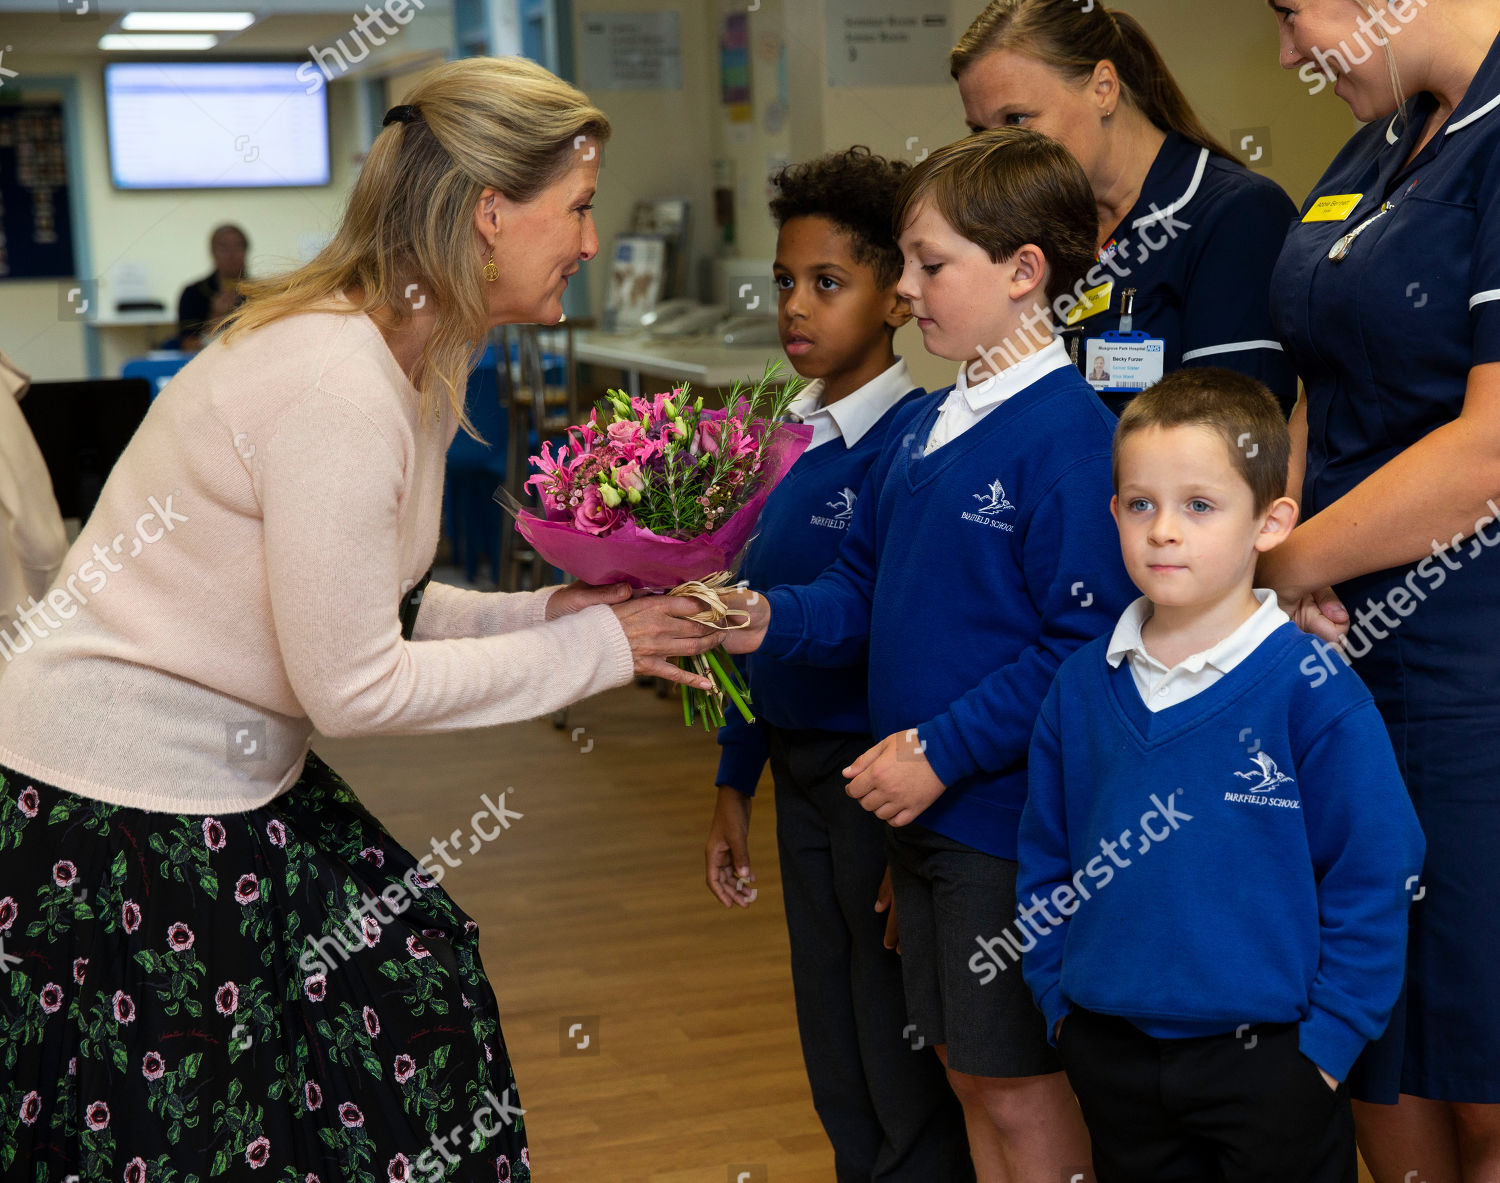 sophie-countess-of-wessex-visit-to-musgrove-park-hospital-taunton-somerset-uk-shutterstock-editorial-10422506as.jpg